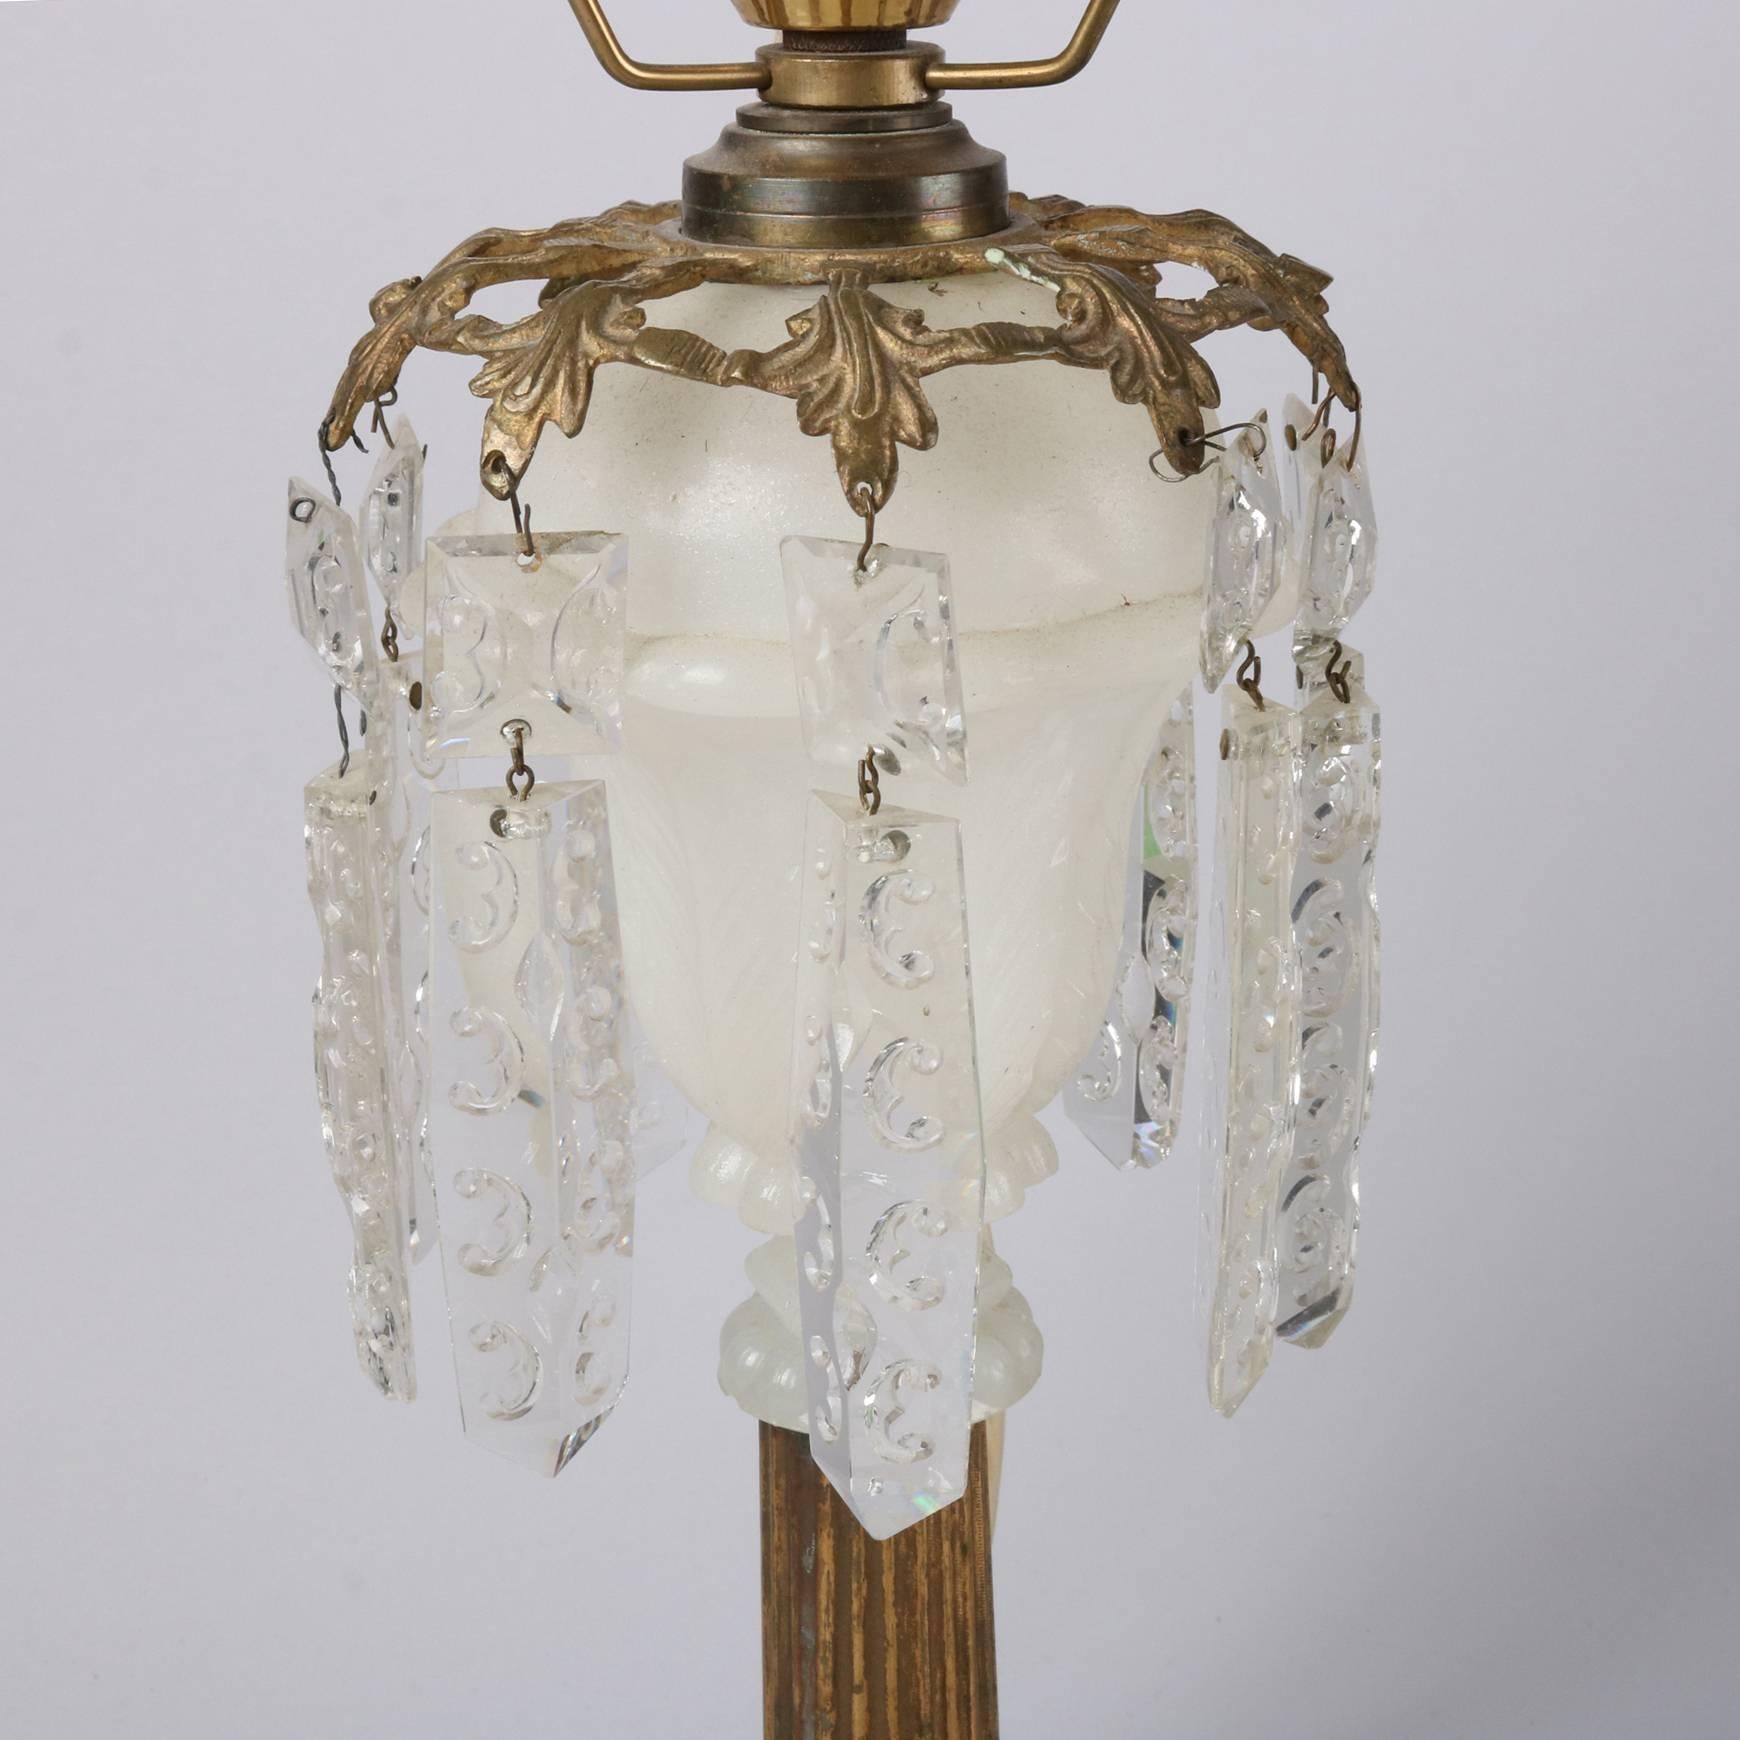 Antique early electrified oil lamp features clambroth font over gilt bronze reeded column on marble base, hanging cut crystals, frosted shade, 19th century

Measures: 21